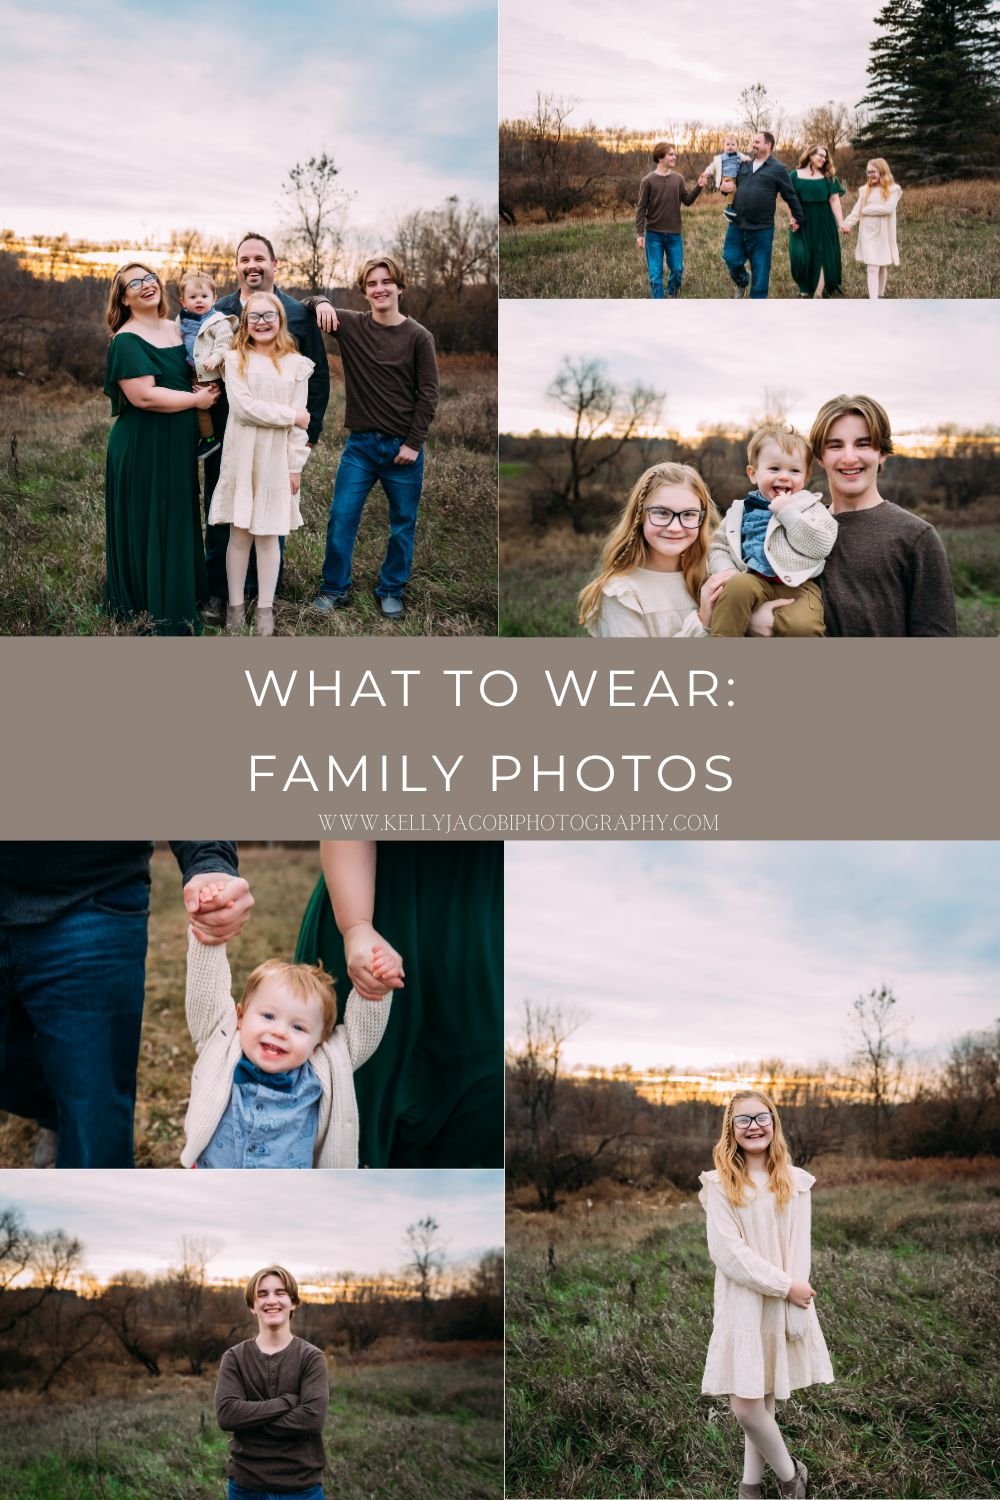 What to wear family photos